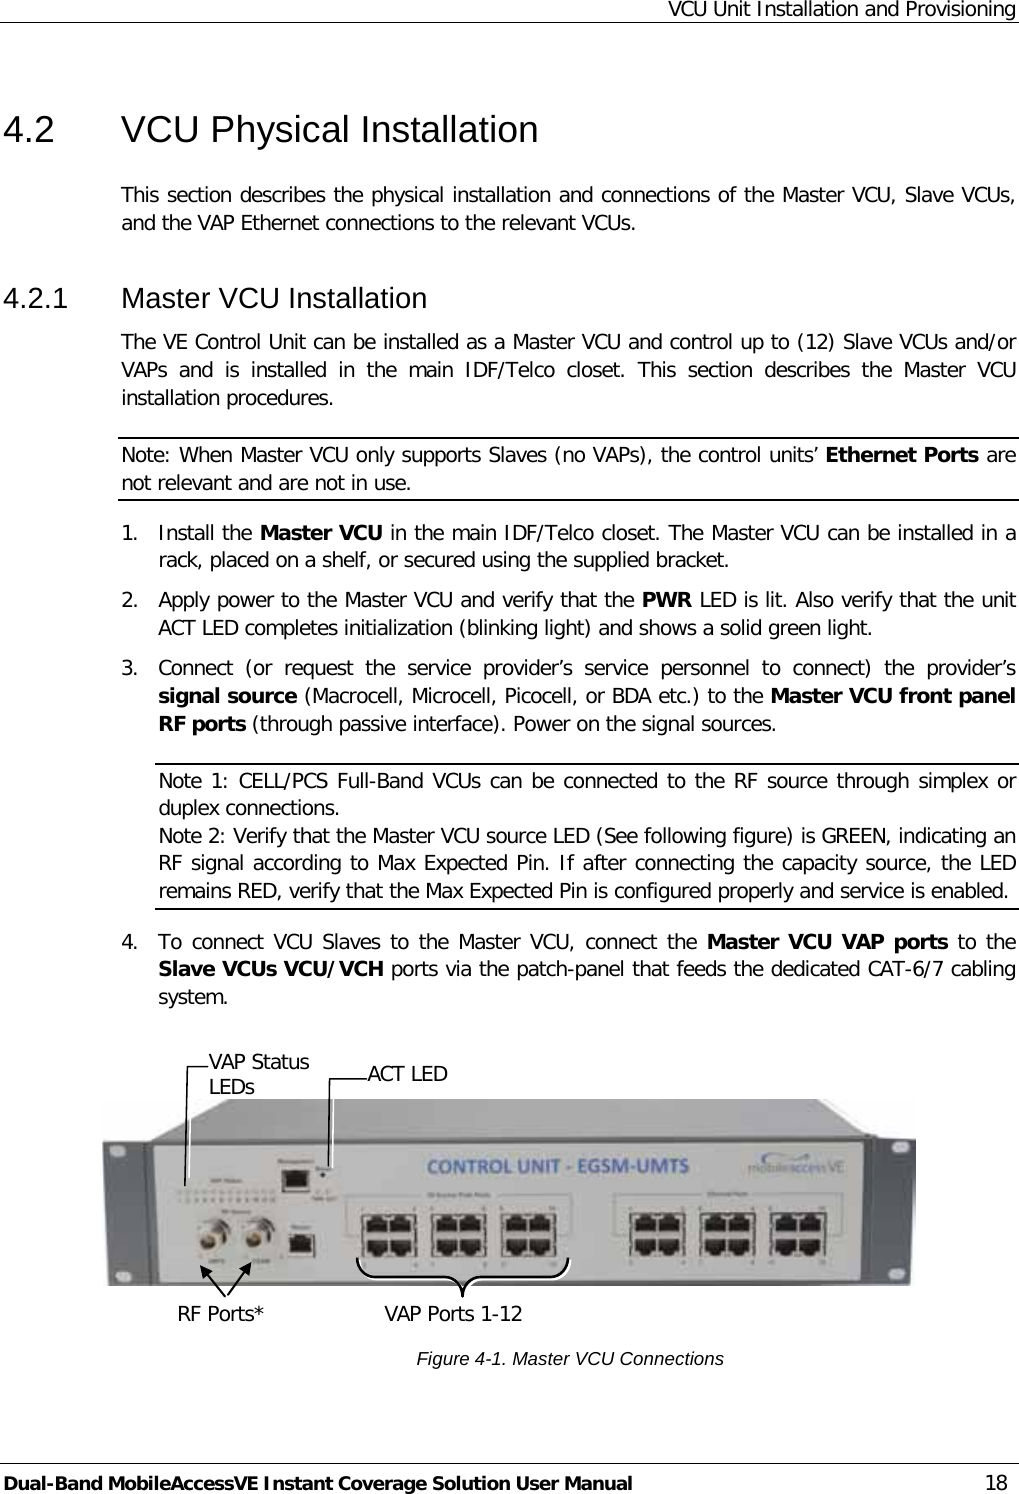 VCU Unit Installation and Provisioning Dual-Band MobileAccessVE Instant Coverage Solution User Manual 18 4.2  VCU Physical Installation This section describes the physical installation and connections of the Master VCU, Slave VCUs, and the VAP Ethernet connections to the relevant VCUs. 4.2.1  Master VCU Installation The VE Control Unit can be installed as a Master VCU and control up to (12) Slave VCUs and/or VAPs  and is installed in the main IDF/Telco closet. This section describes the Master VCU installation procedures. Note: When Master VCU only supports Slaves (no VAPs), the control units’ Ethernet Ports are not relevant and are not in use. 1.  Install the Master VCU in the main IDF/Telco closet. The Master VCU can be installed in a rack, placed on a shelf, or secured using the supplied bracket. 2.  Apply power to the Master VCU and verify that the PWR LED is lit. Also verify that the unit ACT LED completes initialization (blinking light) and shows a solid green light. 3.  Connect (or request the service provider’s service personnel to connect) the provider’s signal source (Macrocell, Microcell, Picocell, or BDA etc.) to the Master VCU front panel RF ports (through passive interface). Power on the signal sources. Note 1: CELL/PCS Full-Band VCUs can be connected to the RF source through simplex or duplex connections. Note 2: Verify that the Master VCU source LED (See following figure) is GREEN, indicating an RF signal according to Max Expected Pin. If after connecting the capacity source, the LED remains RED, verify that the Max Expected Pin is configured properly and service is enabled. 4.  To connect VCU Slaves to the Master VCU, connect the Master VCU VAP ports to the Slave VCUs VCU/VCH ports via the patch-panel that feeds the dedicated CAT-6/7 cabling system.     Figure  4-1. Master VCU Connections RF Ports*  VAP Ports 1-12 ACT LED  VAP Status LEDs 